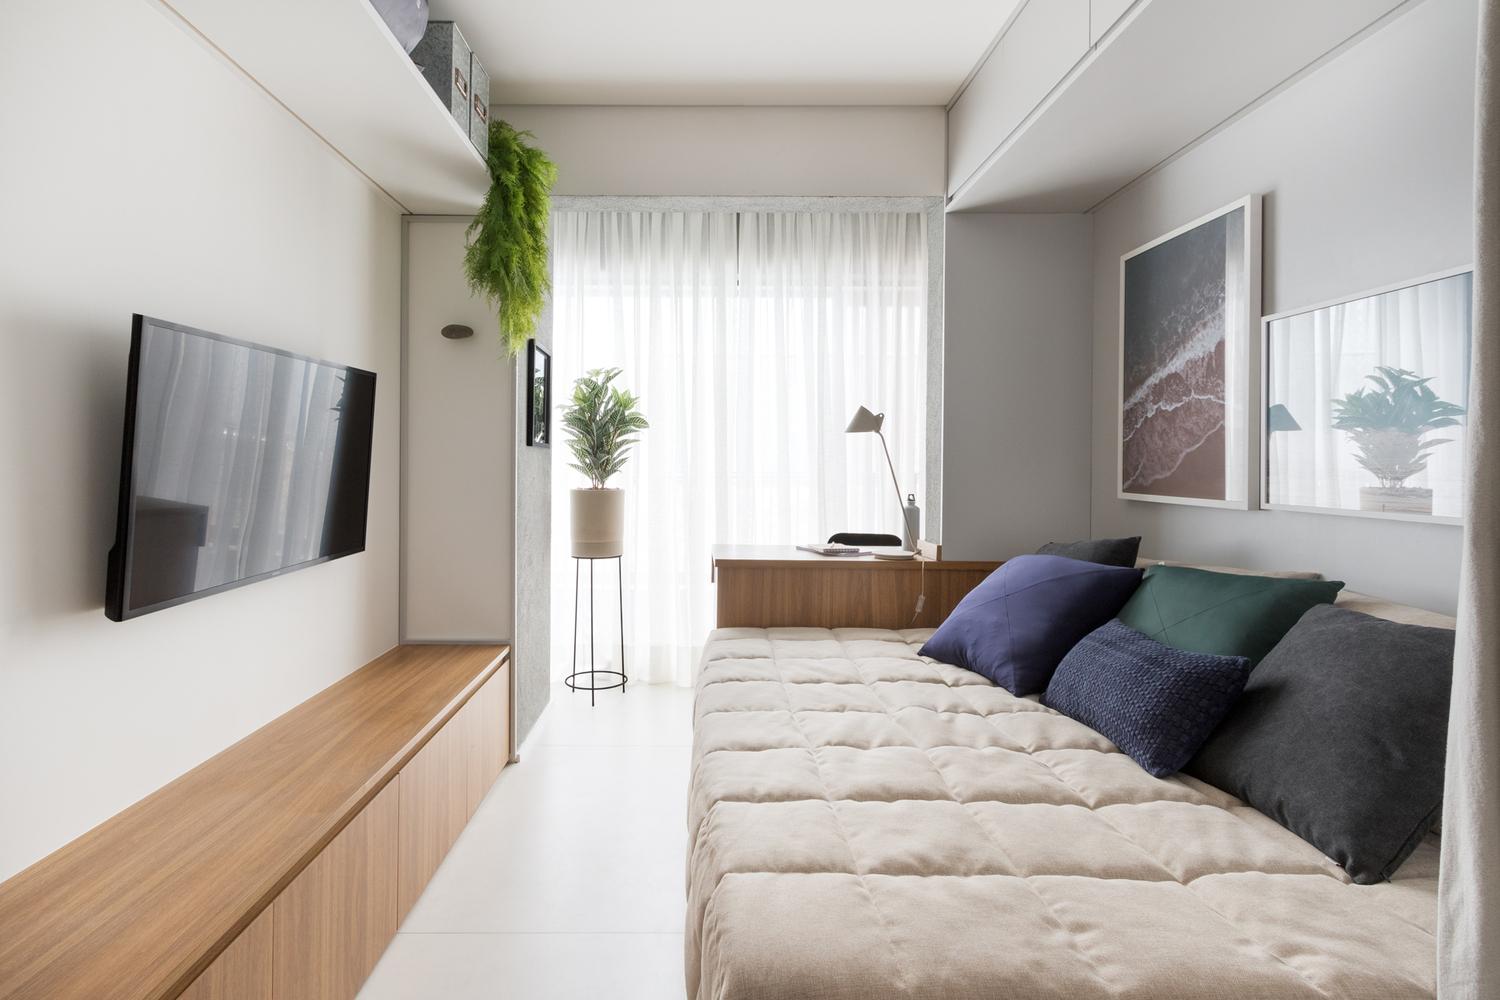 5+ Ways to Maximise Space when Your Home is Below 300sqft